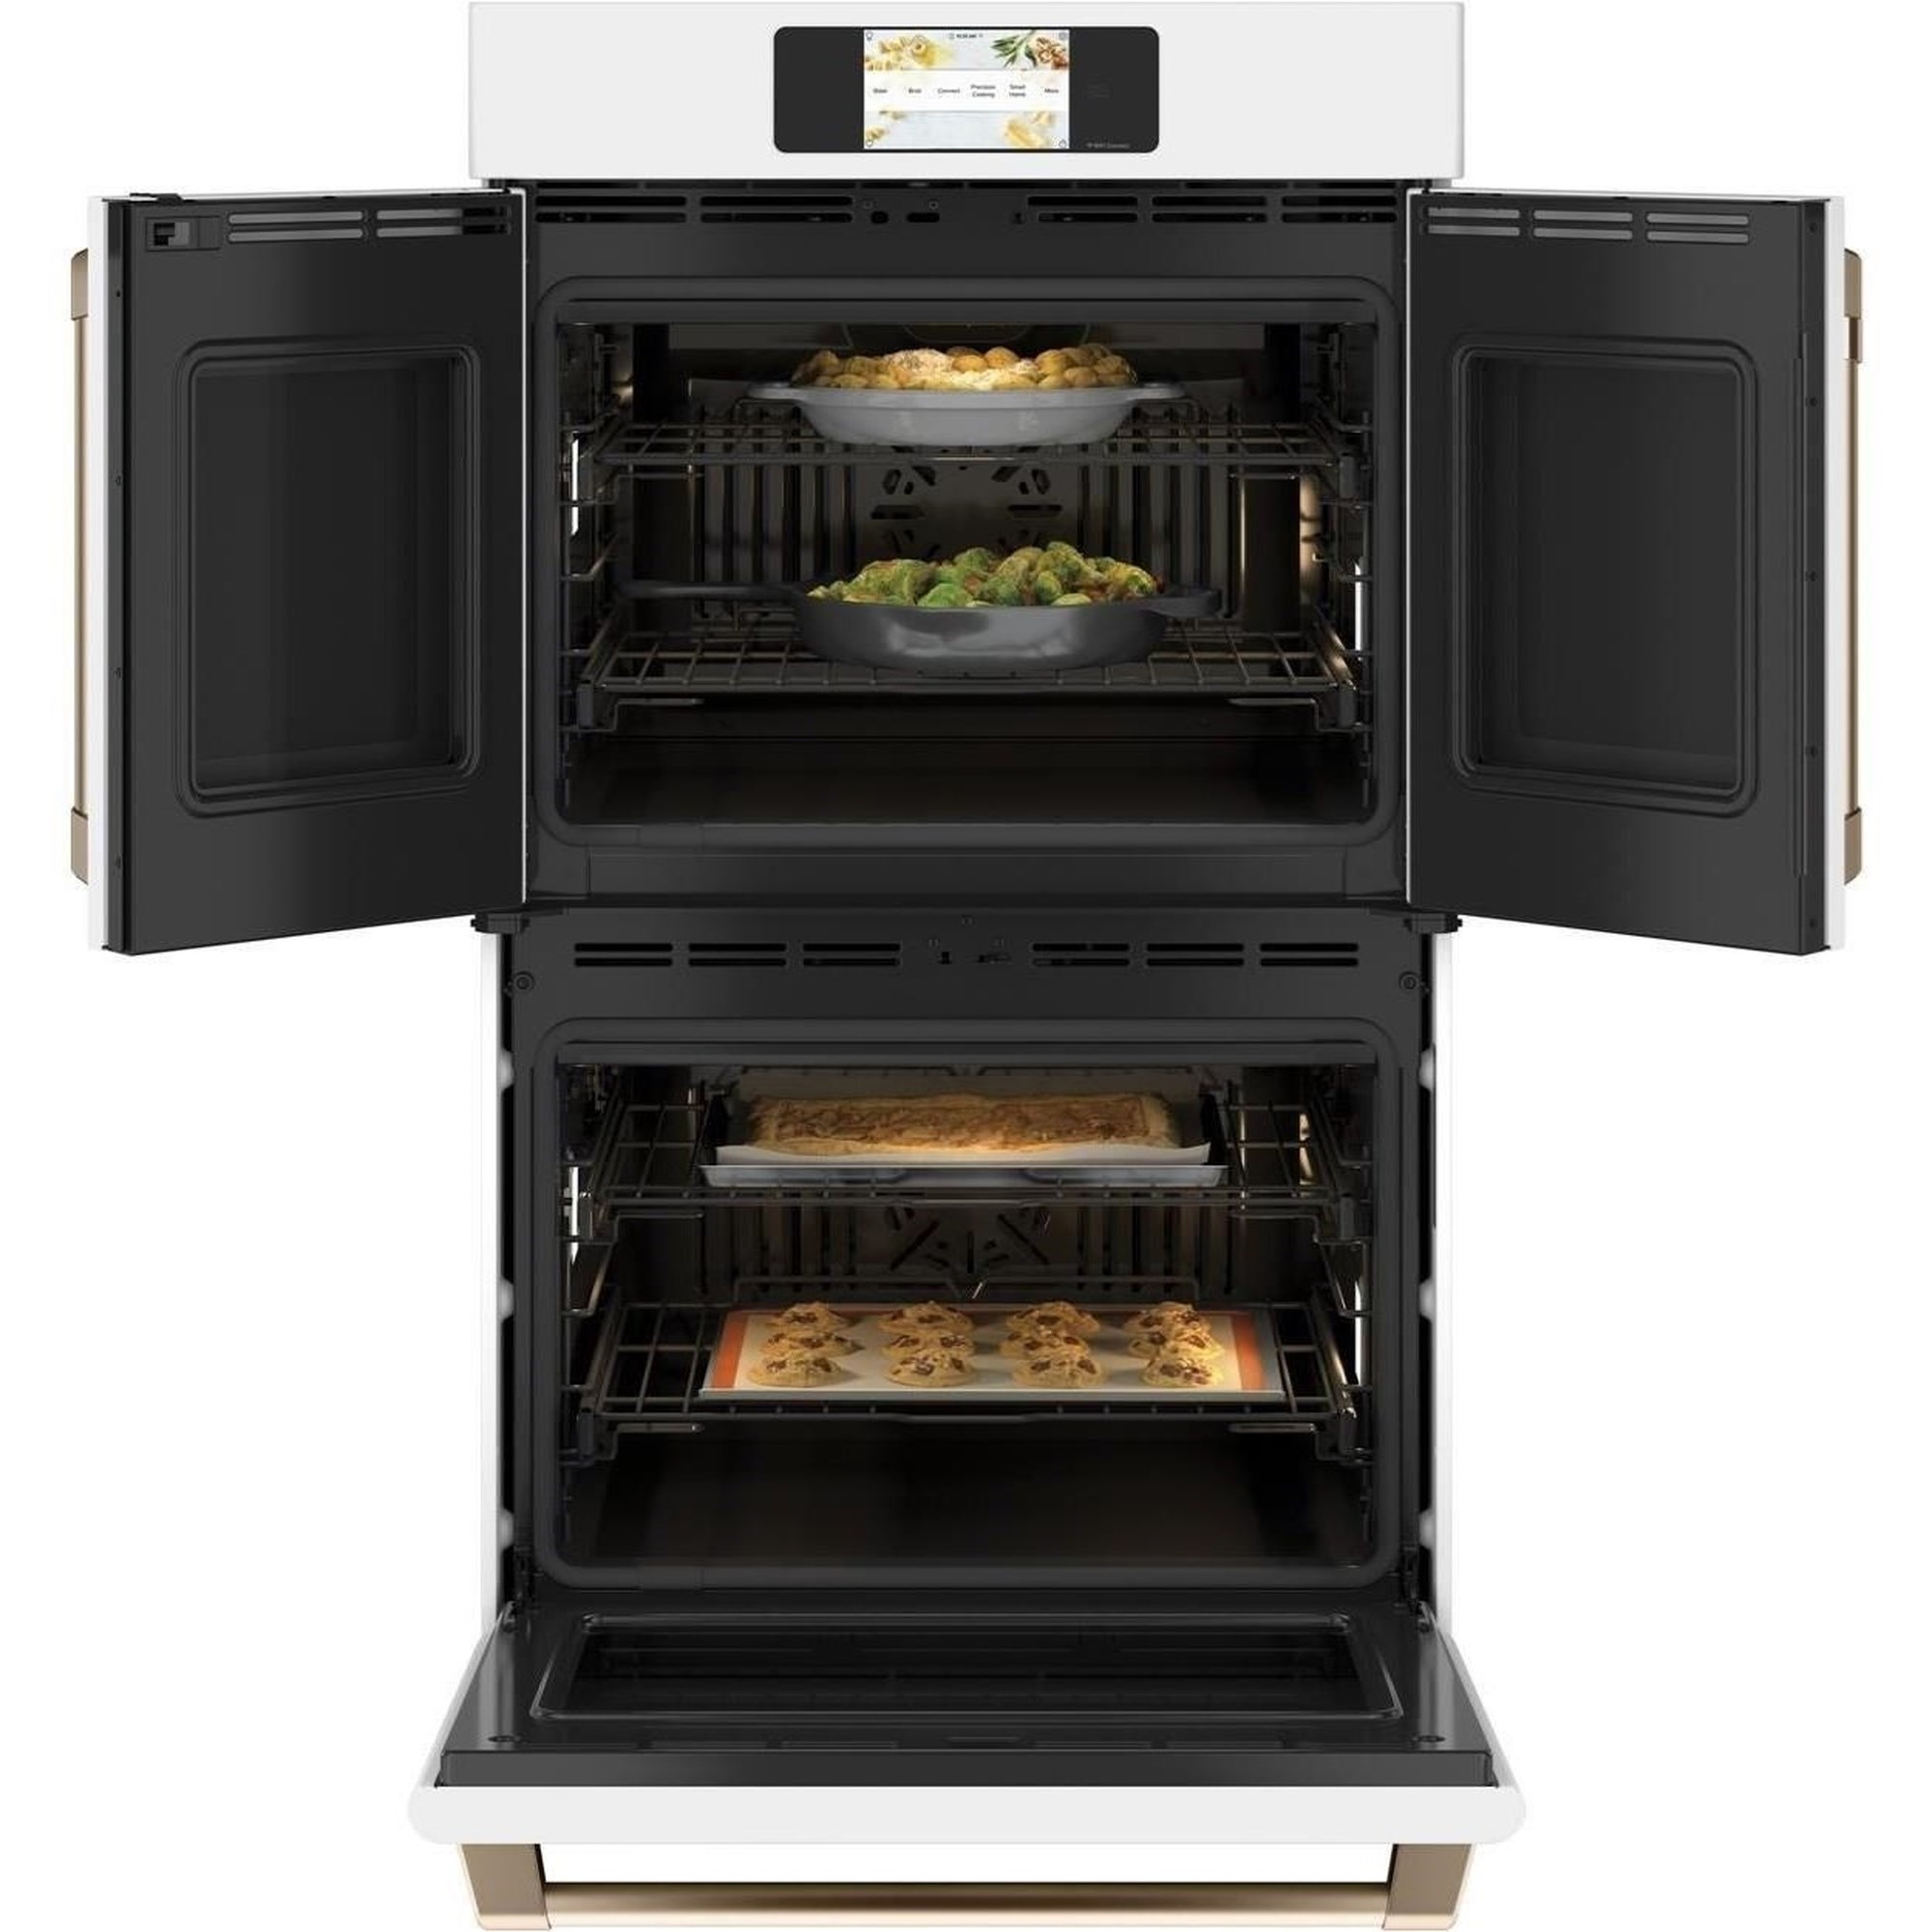 https://imageresizer4.furnituredealer.net/img/remote/images.furnituredealer.net/img/products%2Fge_appliances%2Fcolor%2Fge%20electric%20wall%20ovens%20-%202015_ctd90fp4nw2-b3.jpg?width=2000&height=2000&scale=both